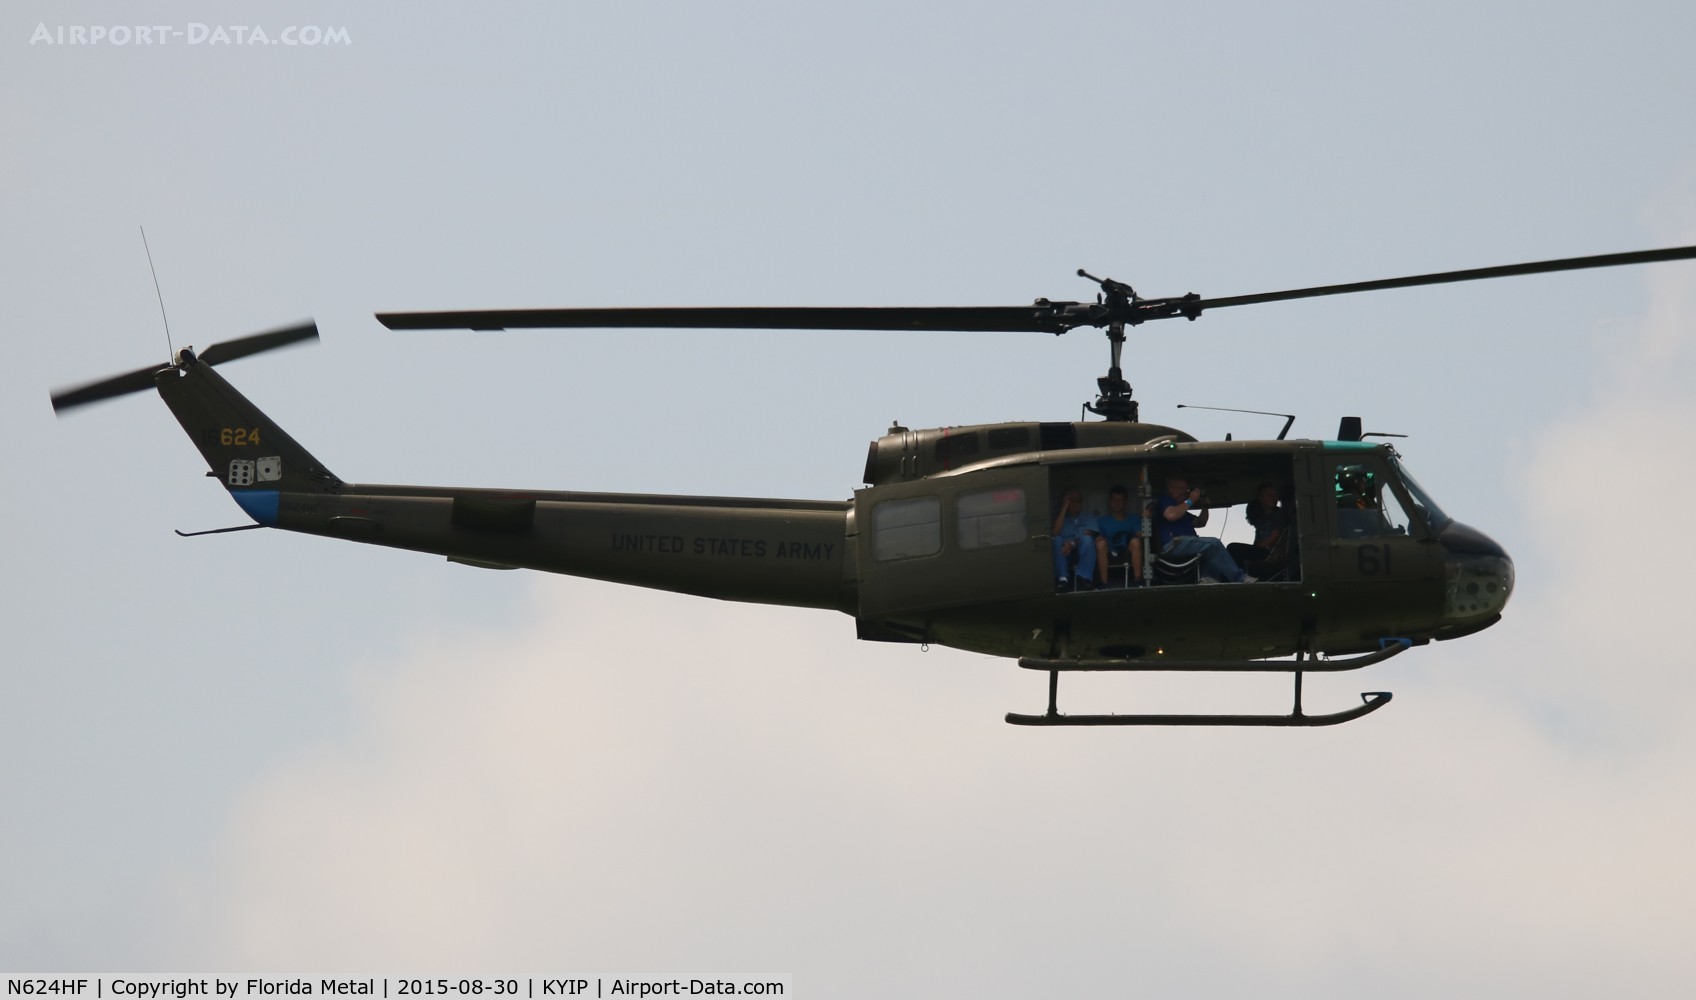 N624HF, 1966 Bell UH-1D Iroquois C/N 8819, UH-1 zx